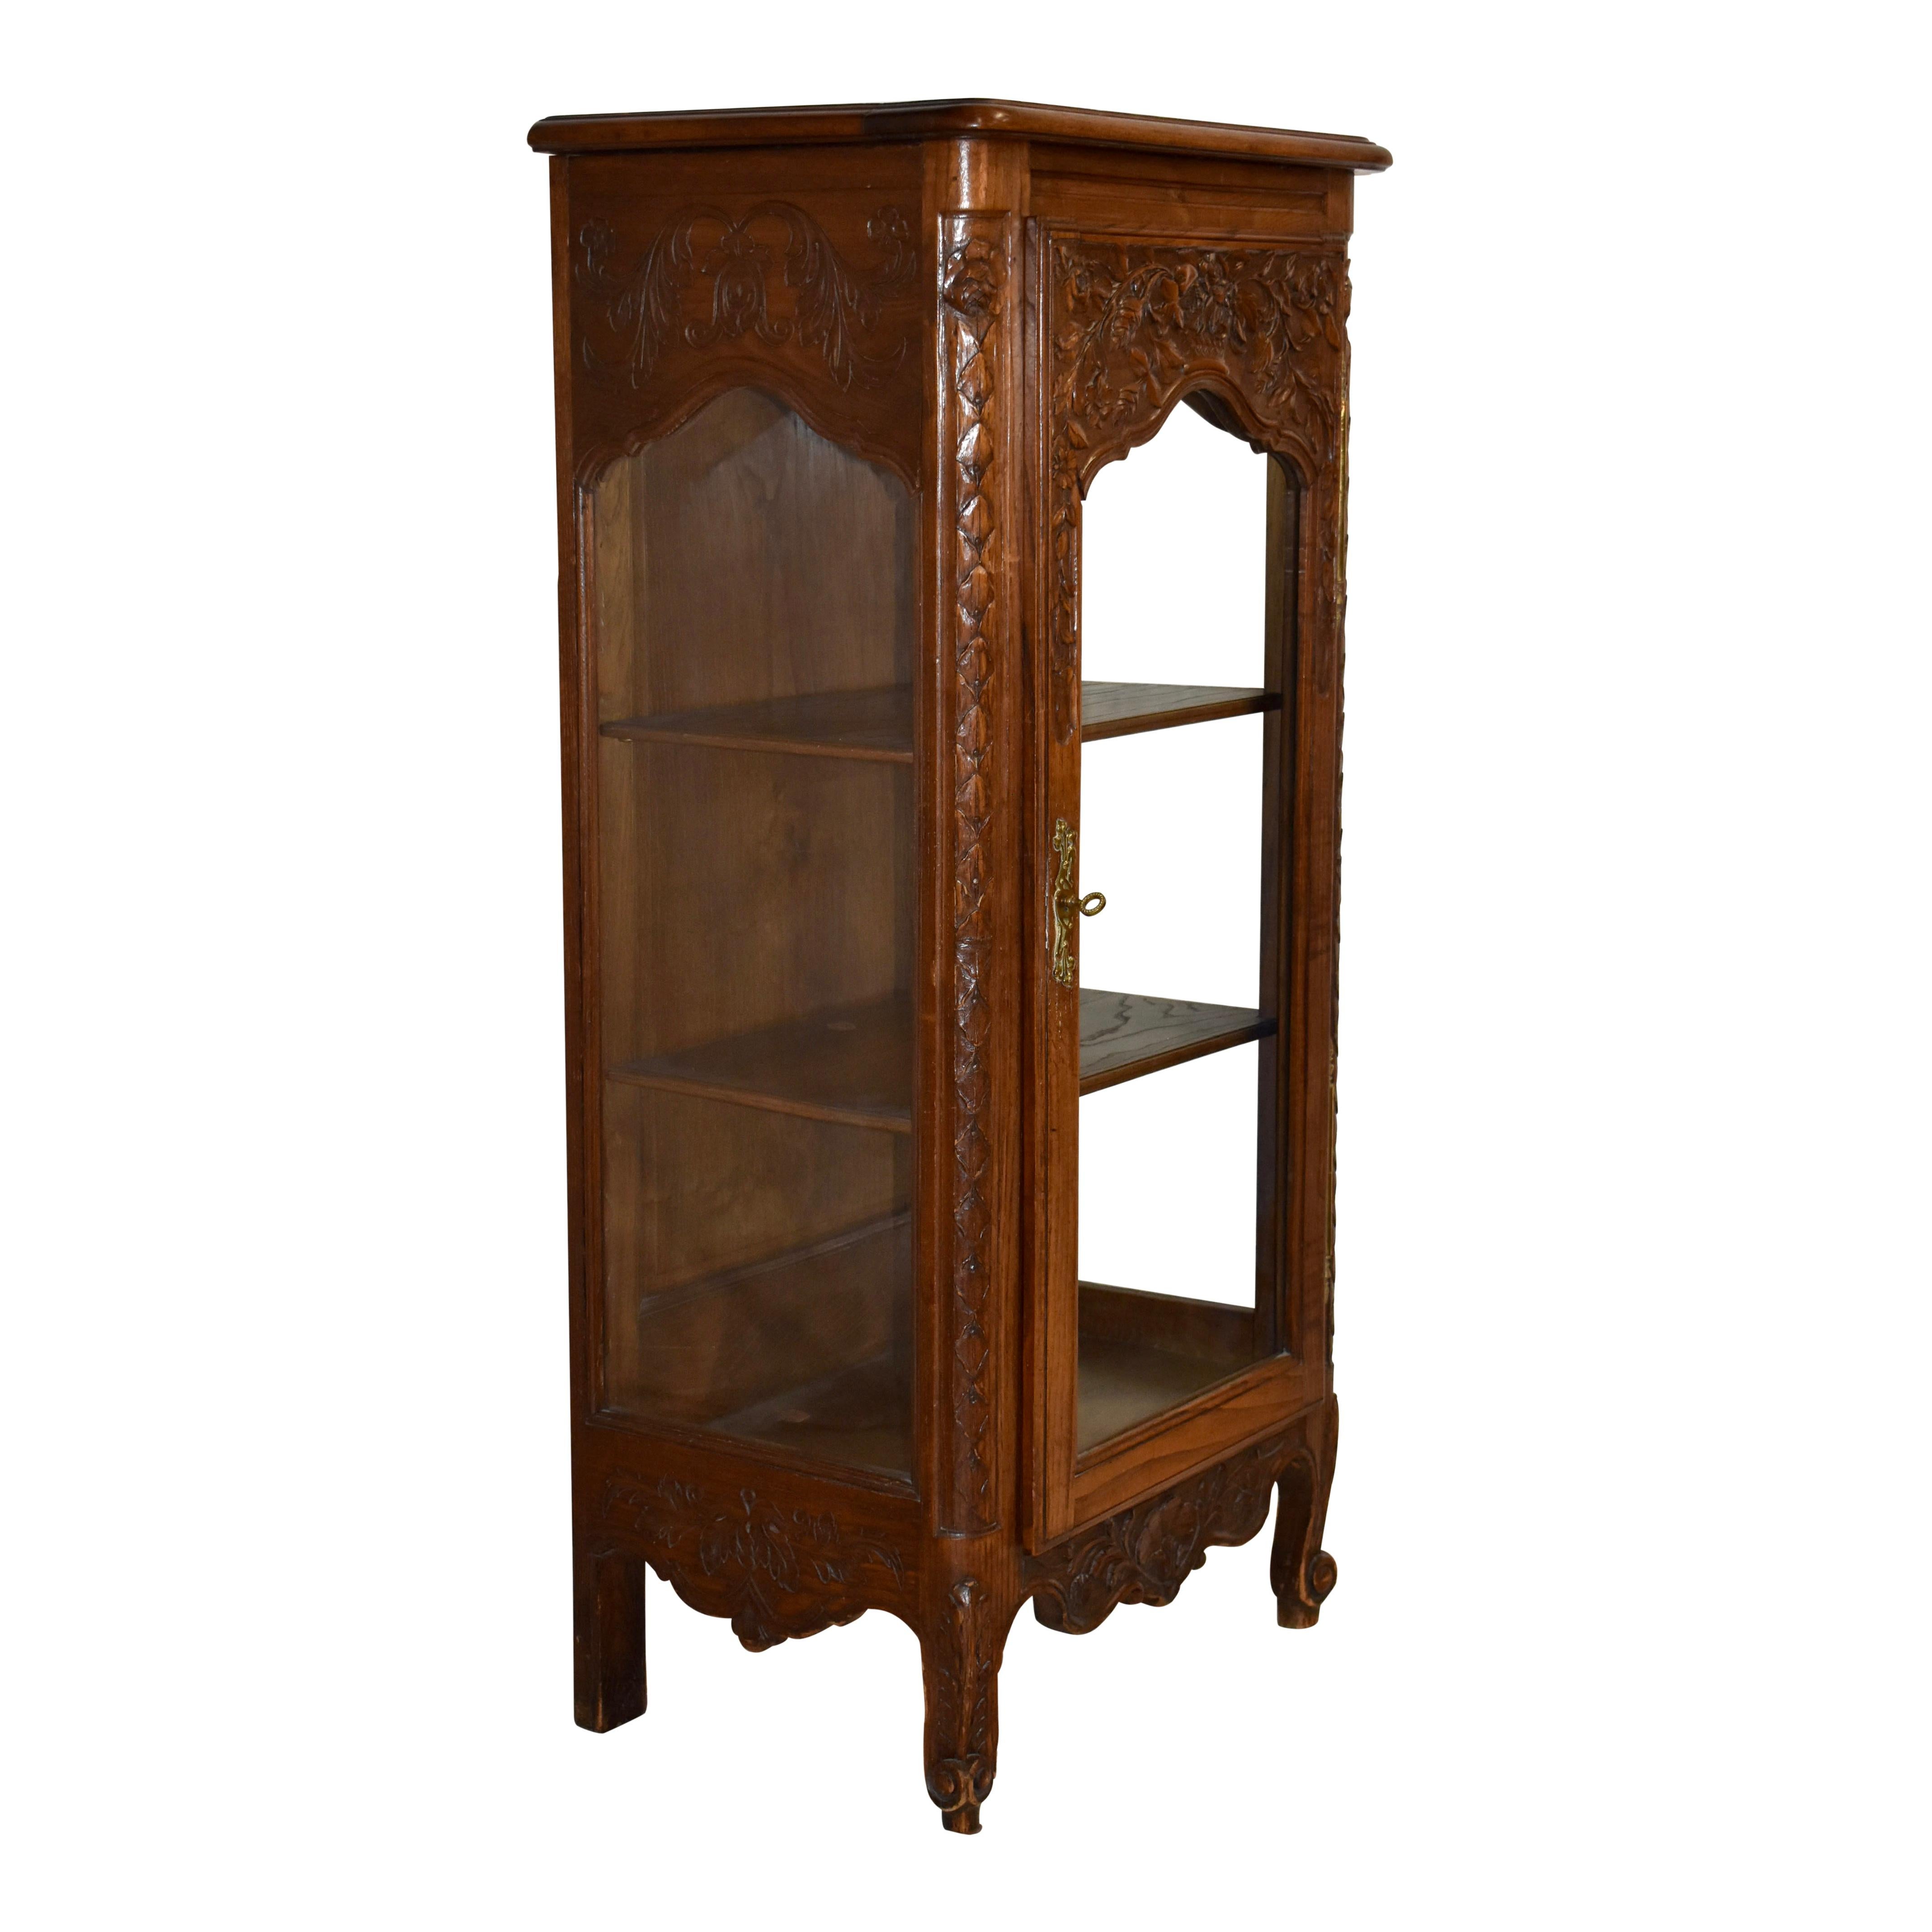 Beauty abounds in this petite carved vitrine from the late-19th century. Crafted from European Oak with a medium finish that does not hide the oak's beautiful grain, the vitrine features a floral motif with carvings of roses on the door and at the